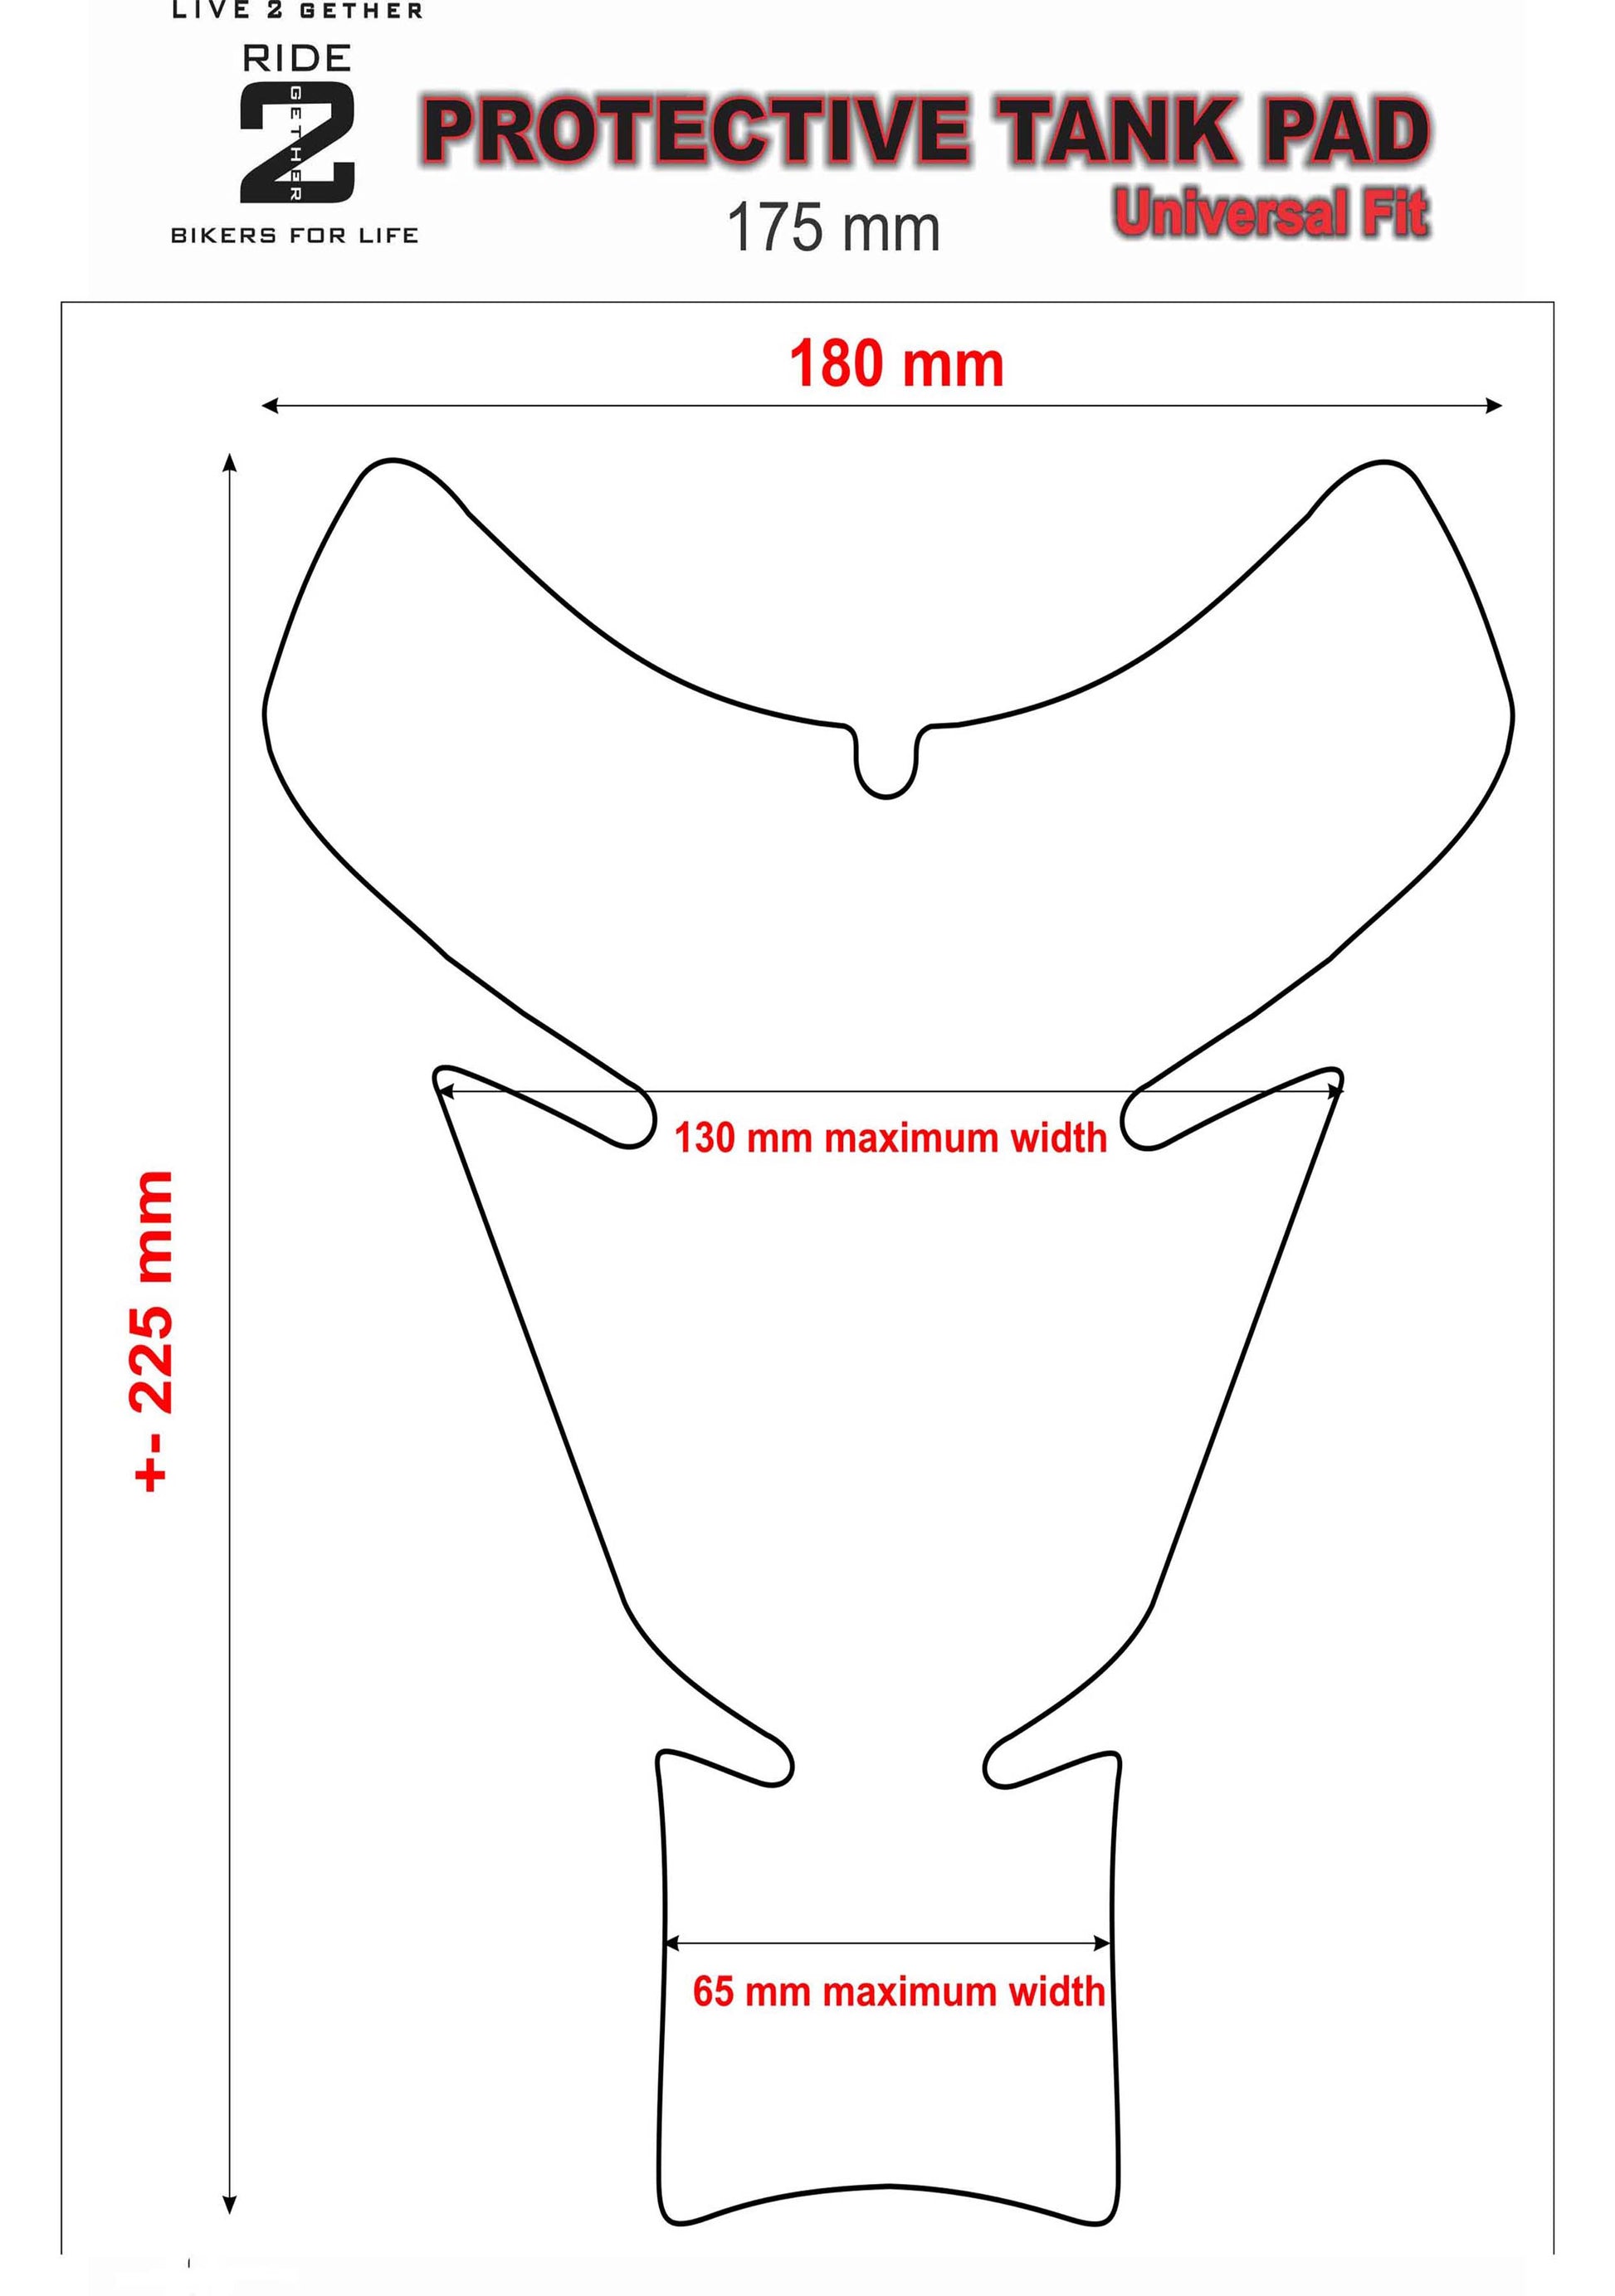 Universal Fit She Viking Warrior Tank Pad Protector. A Street Pad which fits most motorcycles.